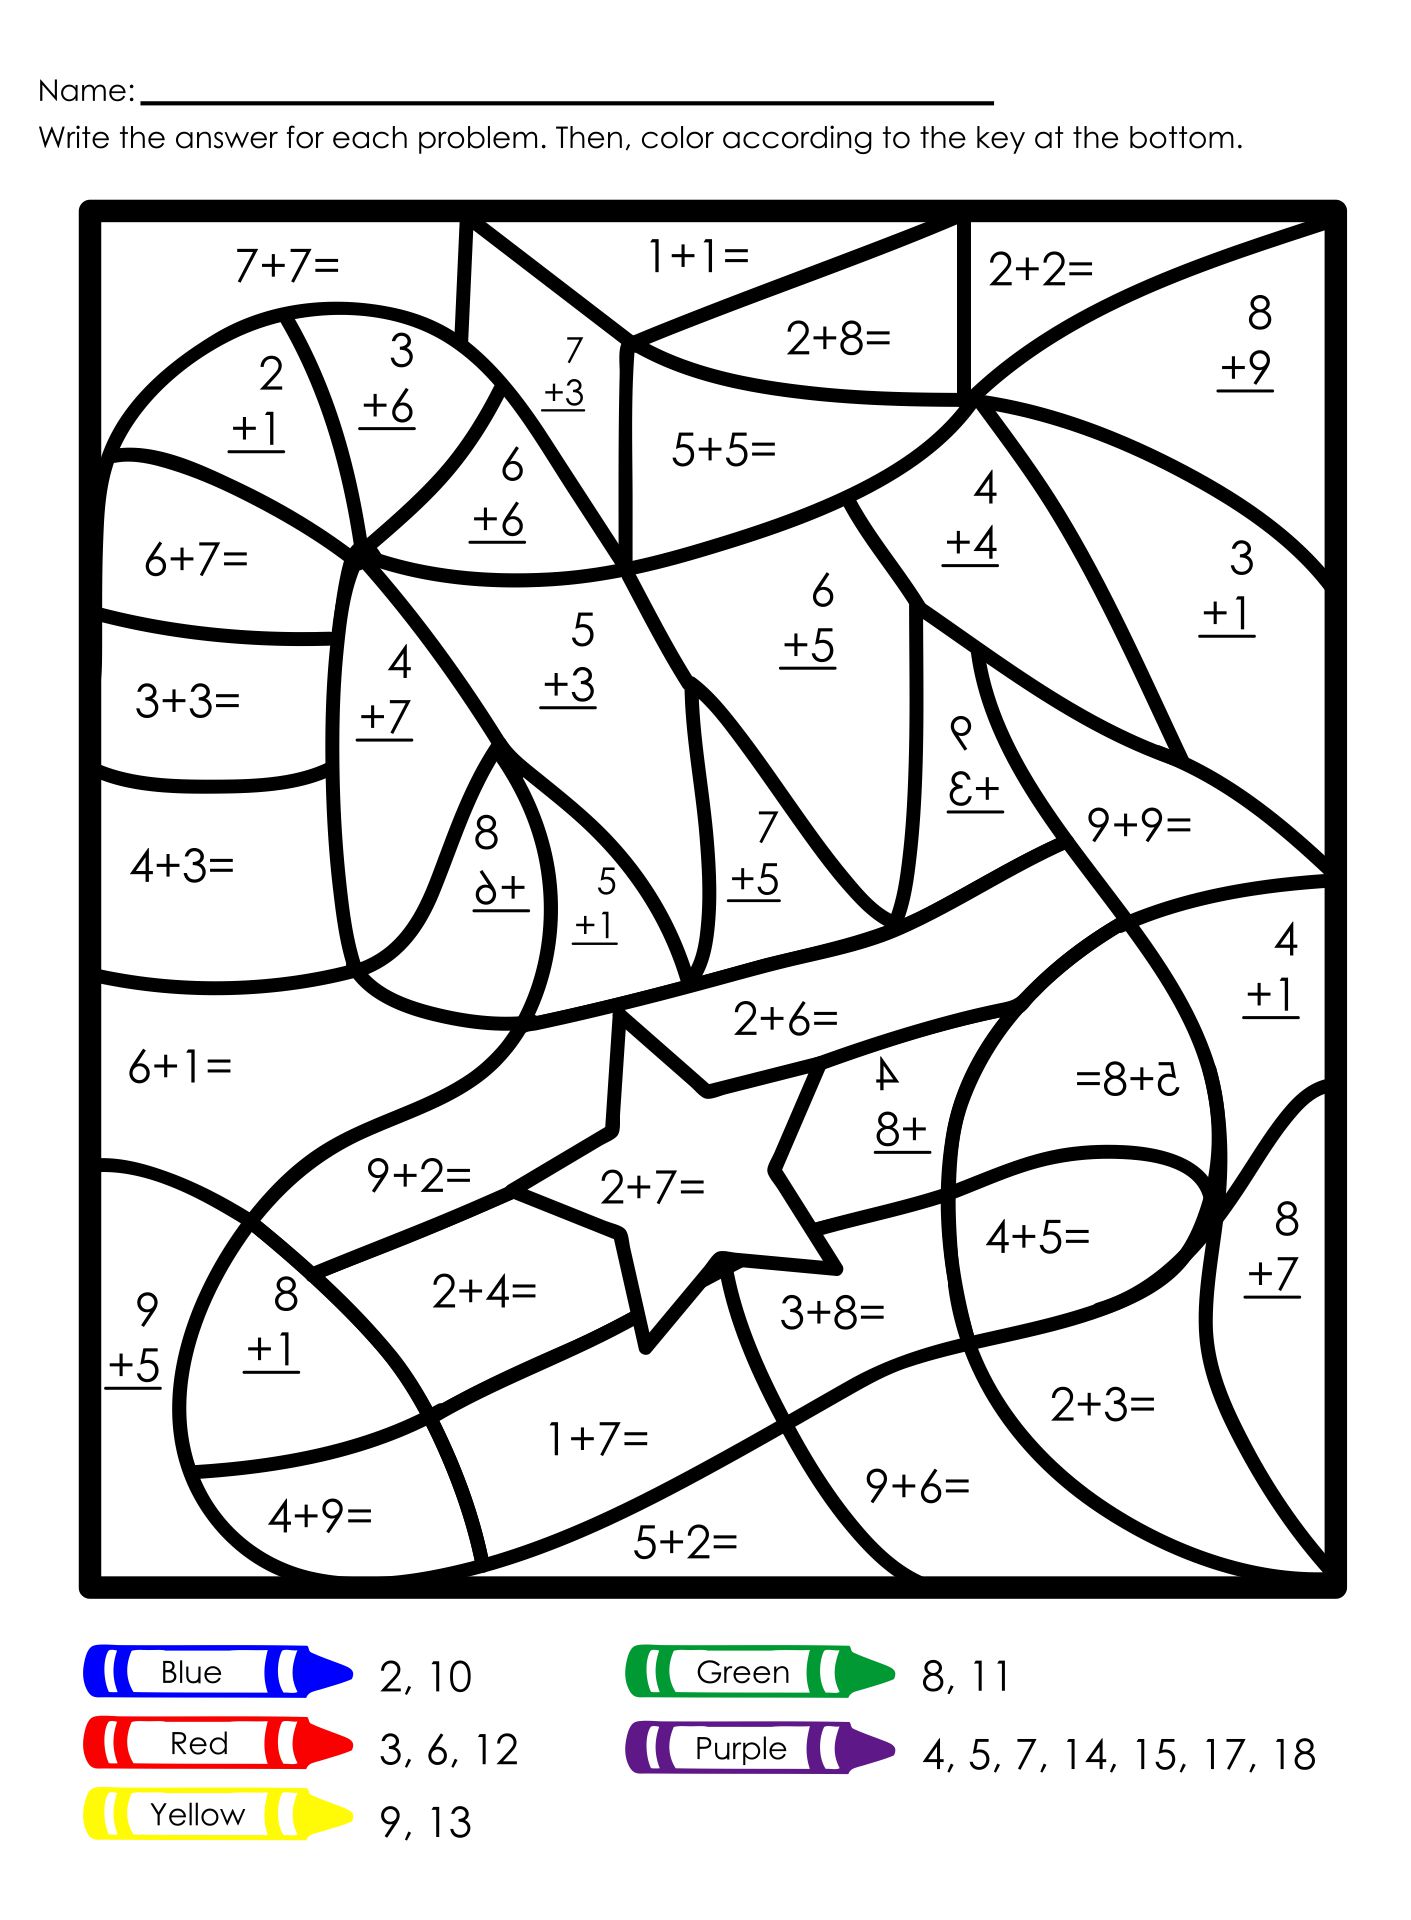 disney-math-coloring-worksheets-coloring-pages